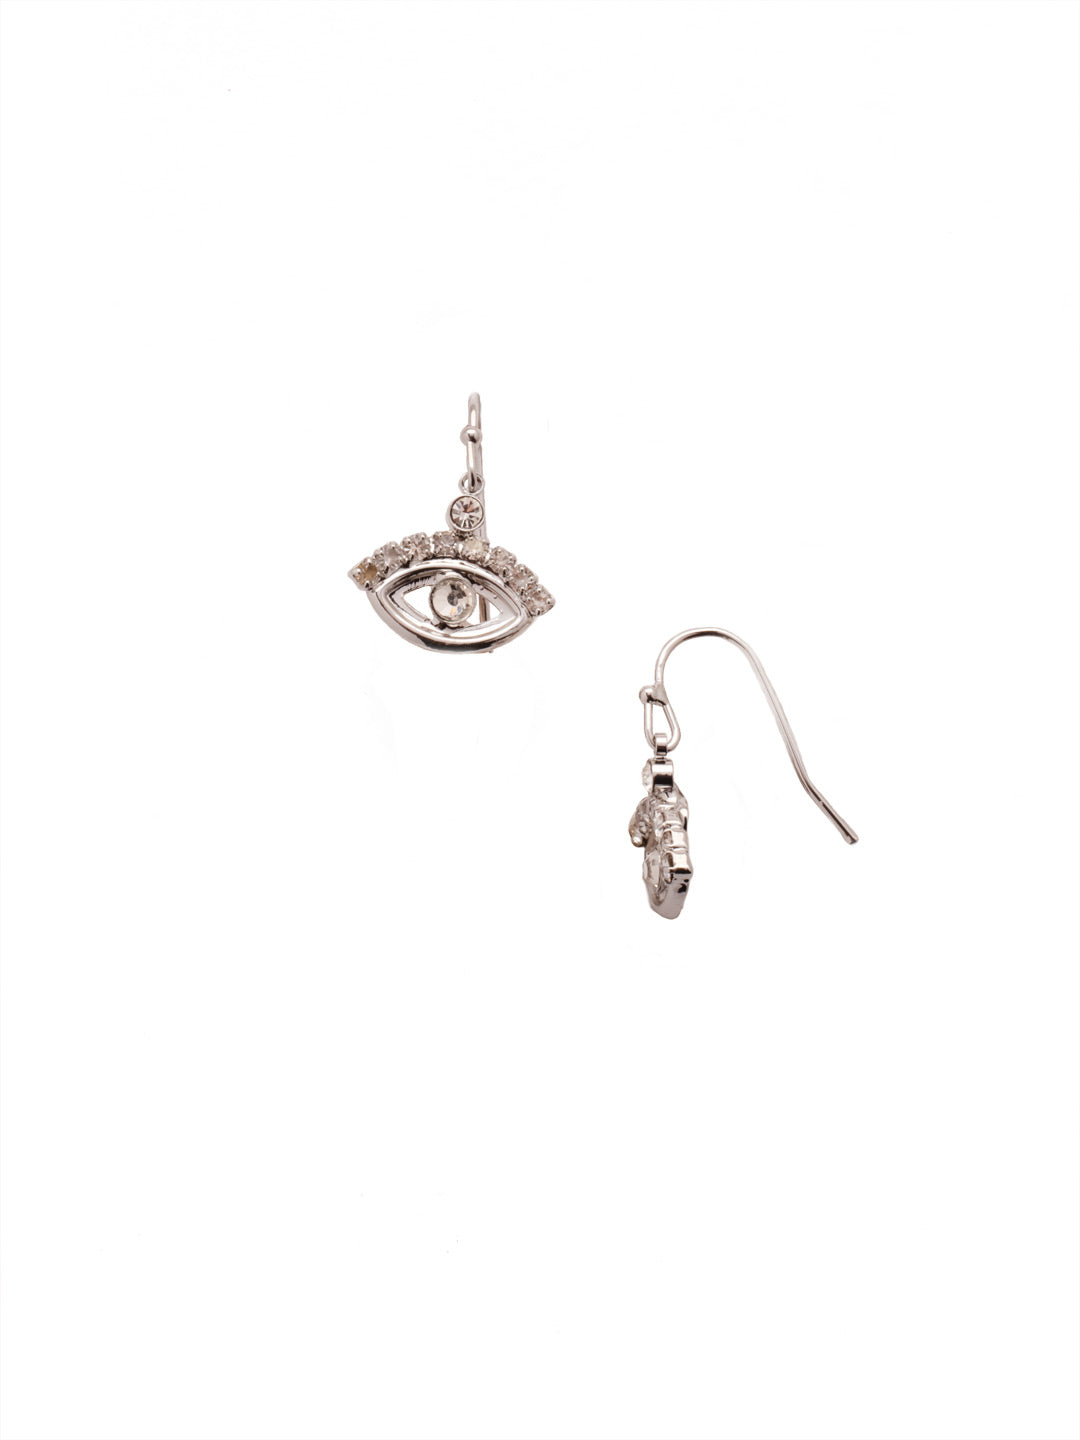 Mini Evil Eye Dangle Earrings - EEV6PDCRY - Quirky meets sparkly in our Mini Evil Eye Dangle Earrings. The Evil Eye symbol is offset by sparkling round crystals. From Sorrelli's Crystal collection in our Palladium finish.